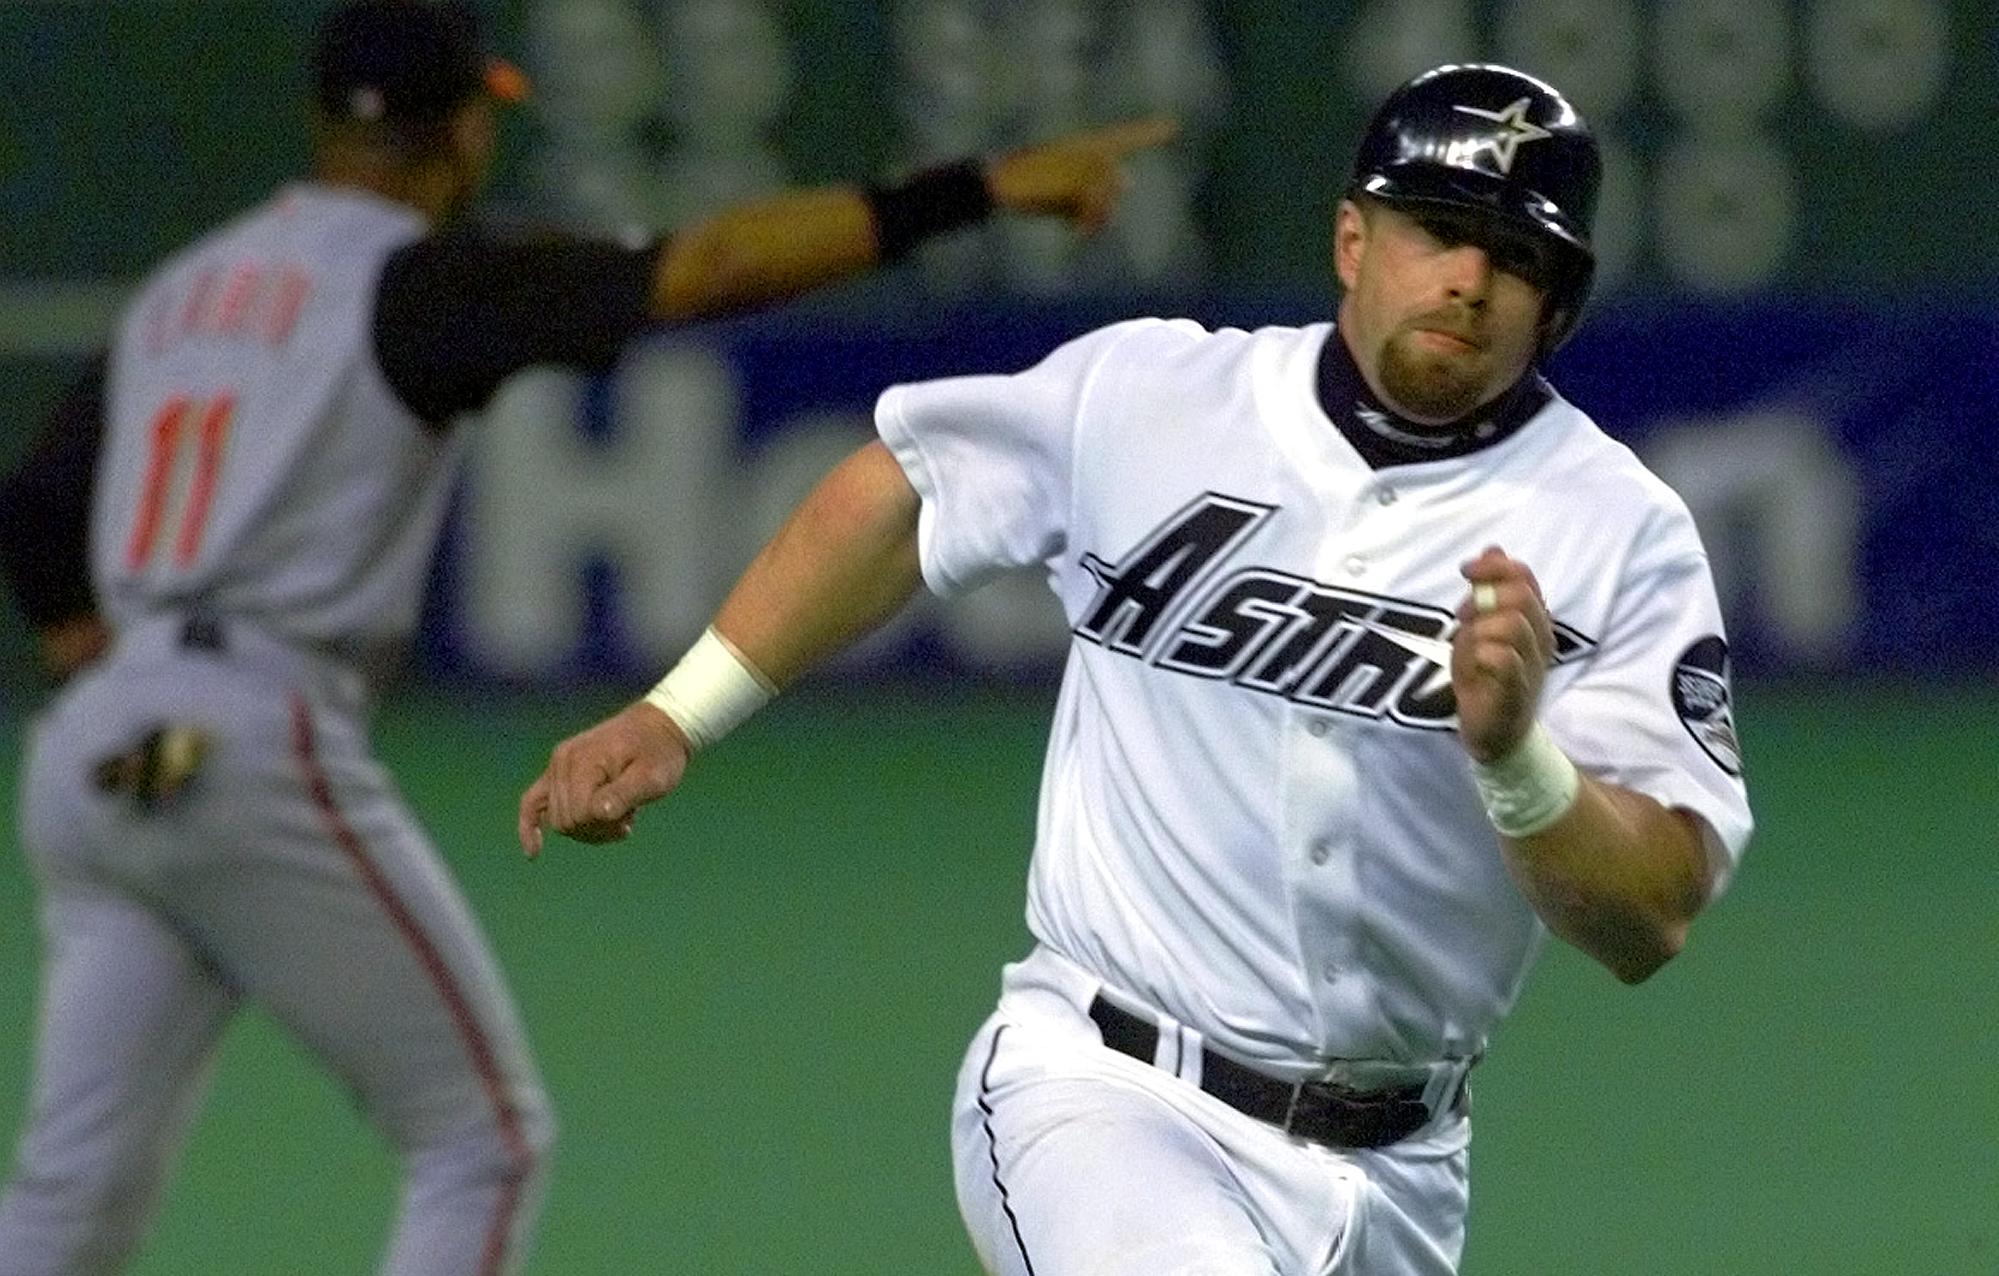 Astros icons Craig Biggio, Jeff Bagwell team up for first pitch